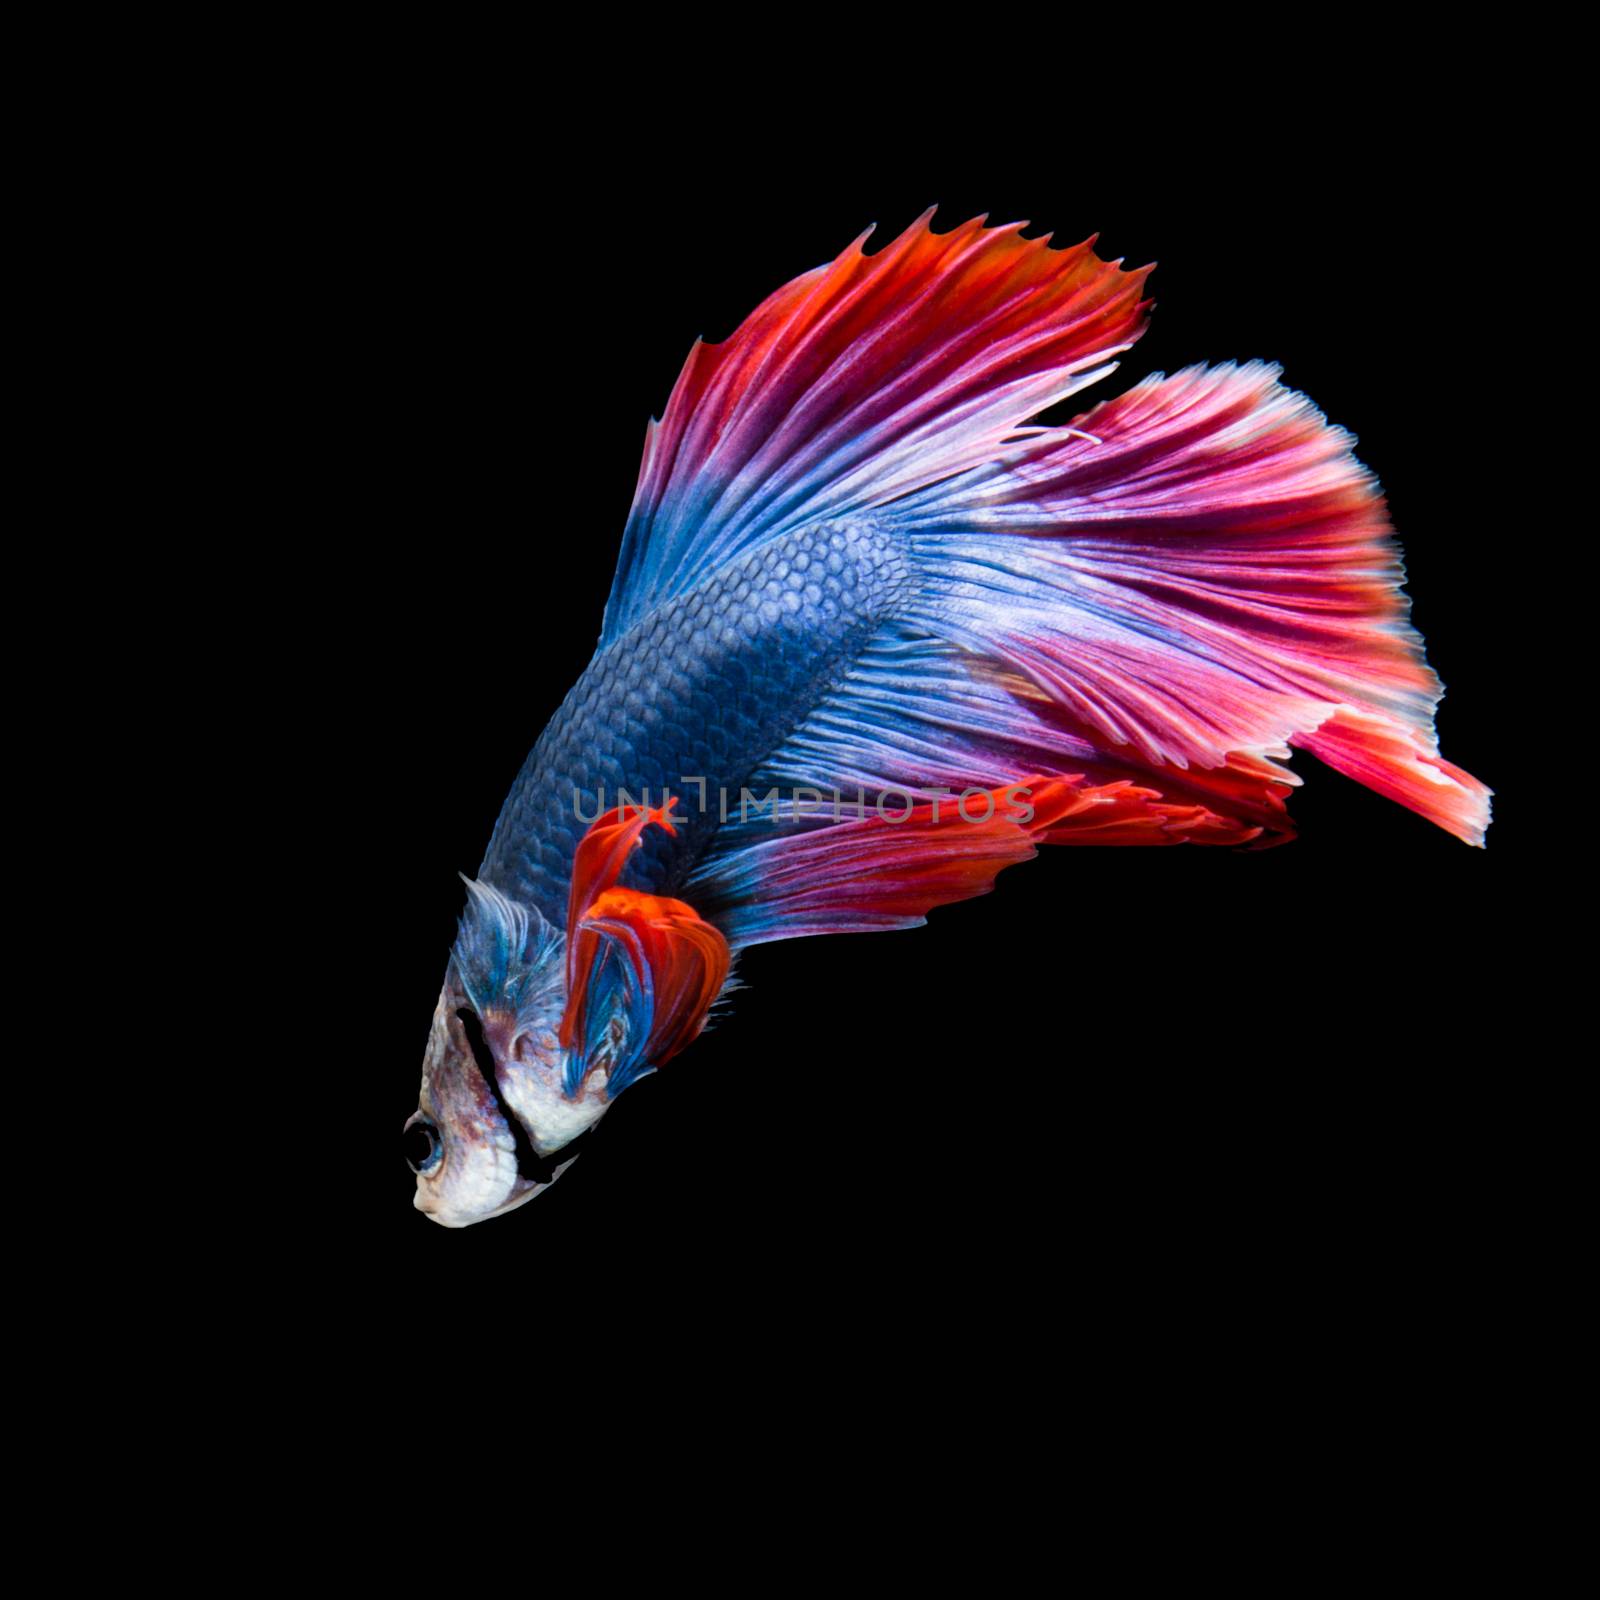 Red and blue siamese fighting fish, betta fish, half moon tail profile, on black background